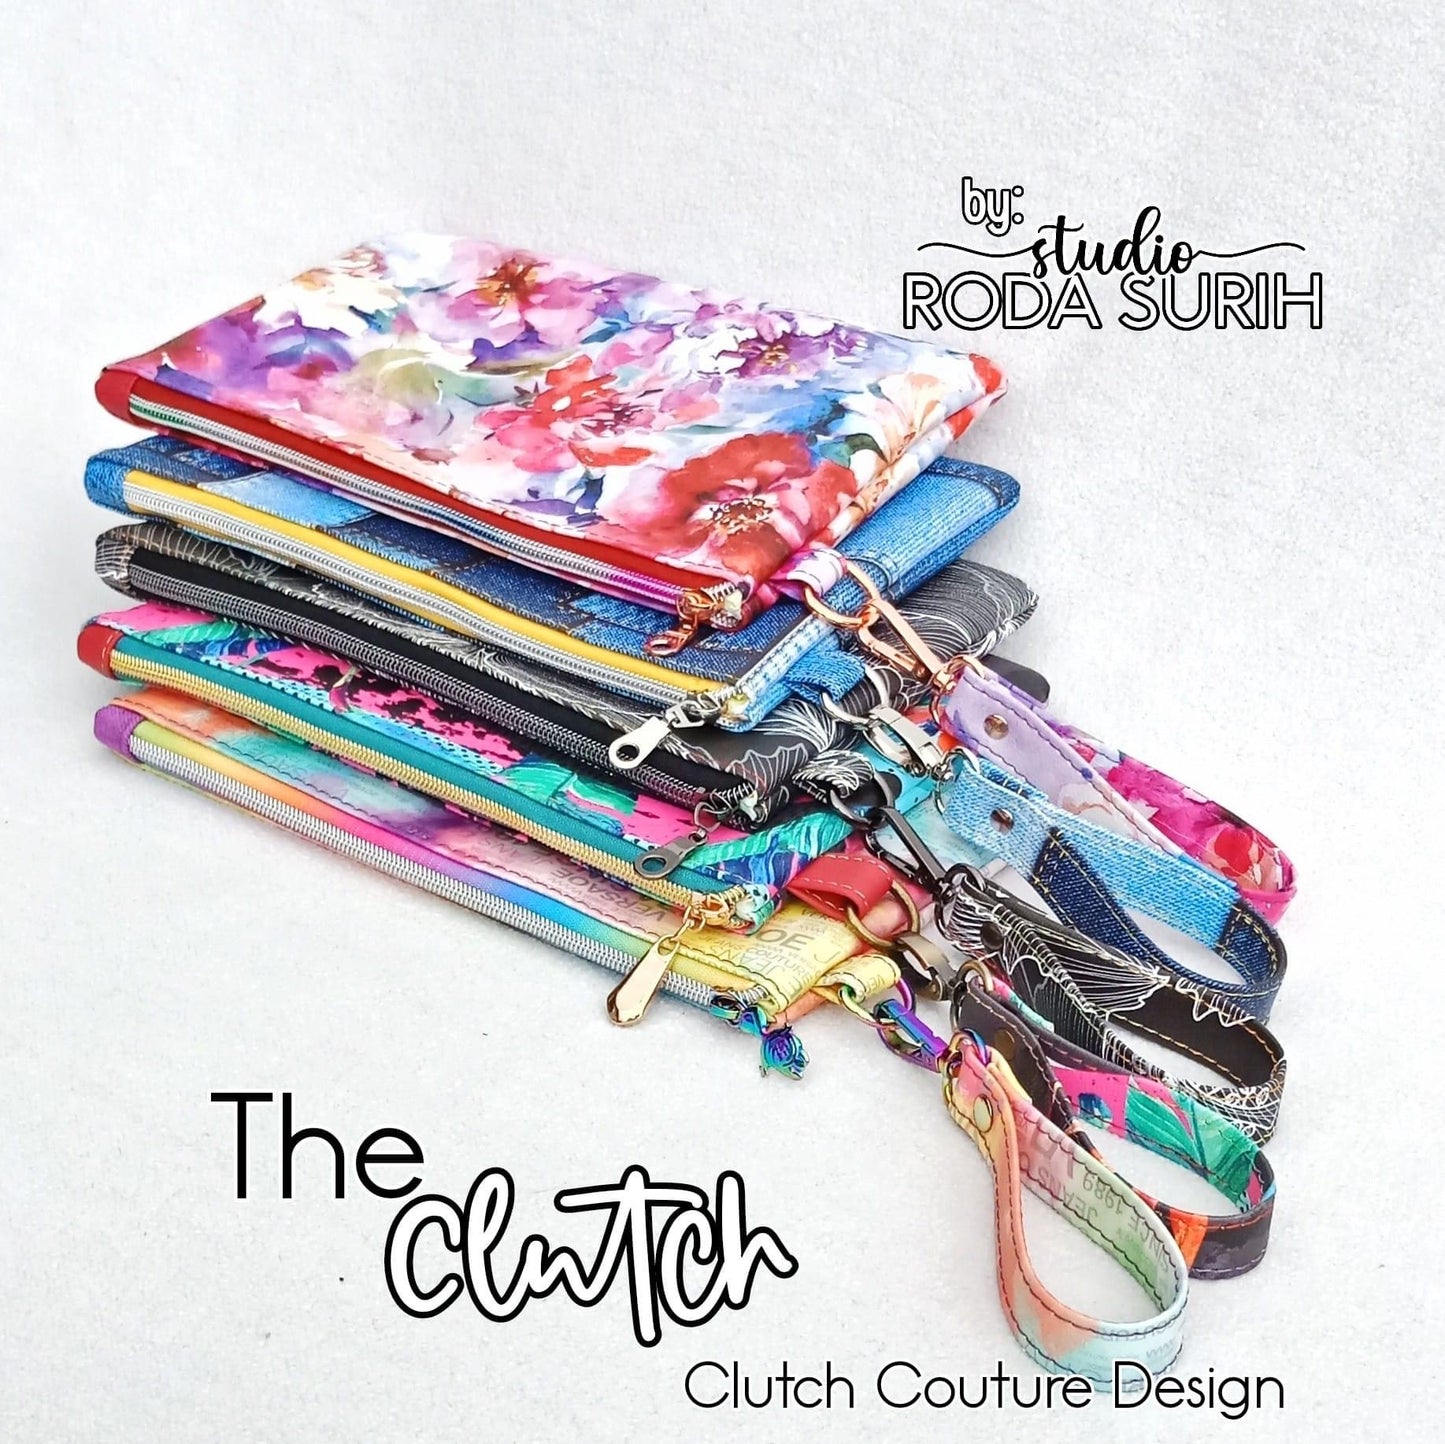 Ears – The Clutch Couture Designs